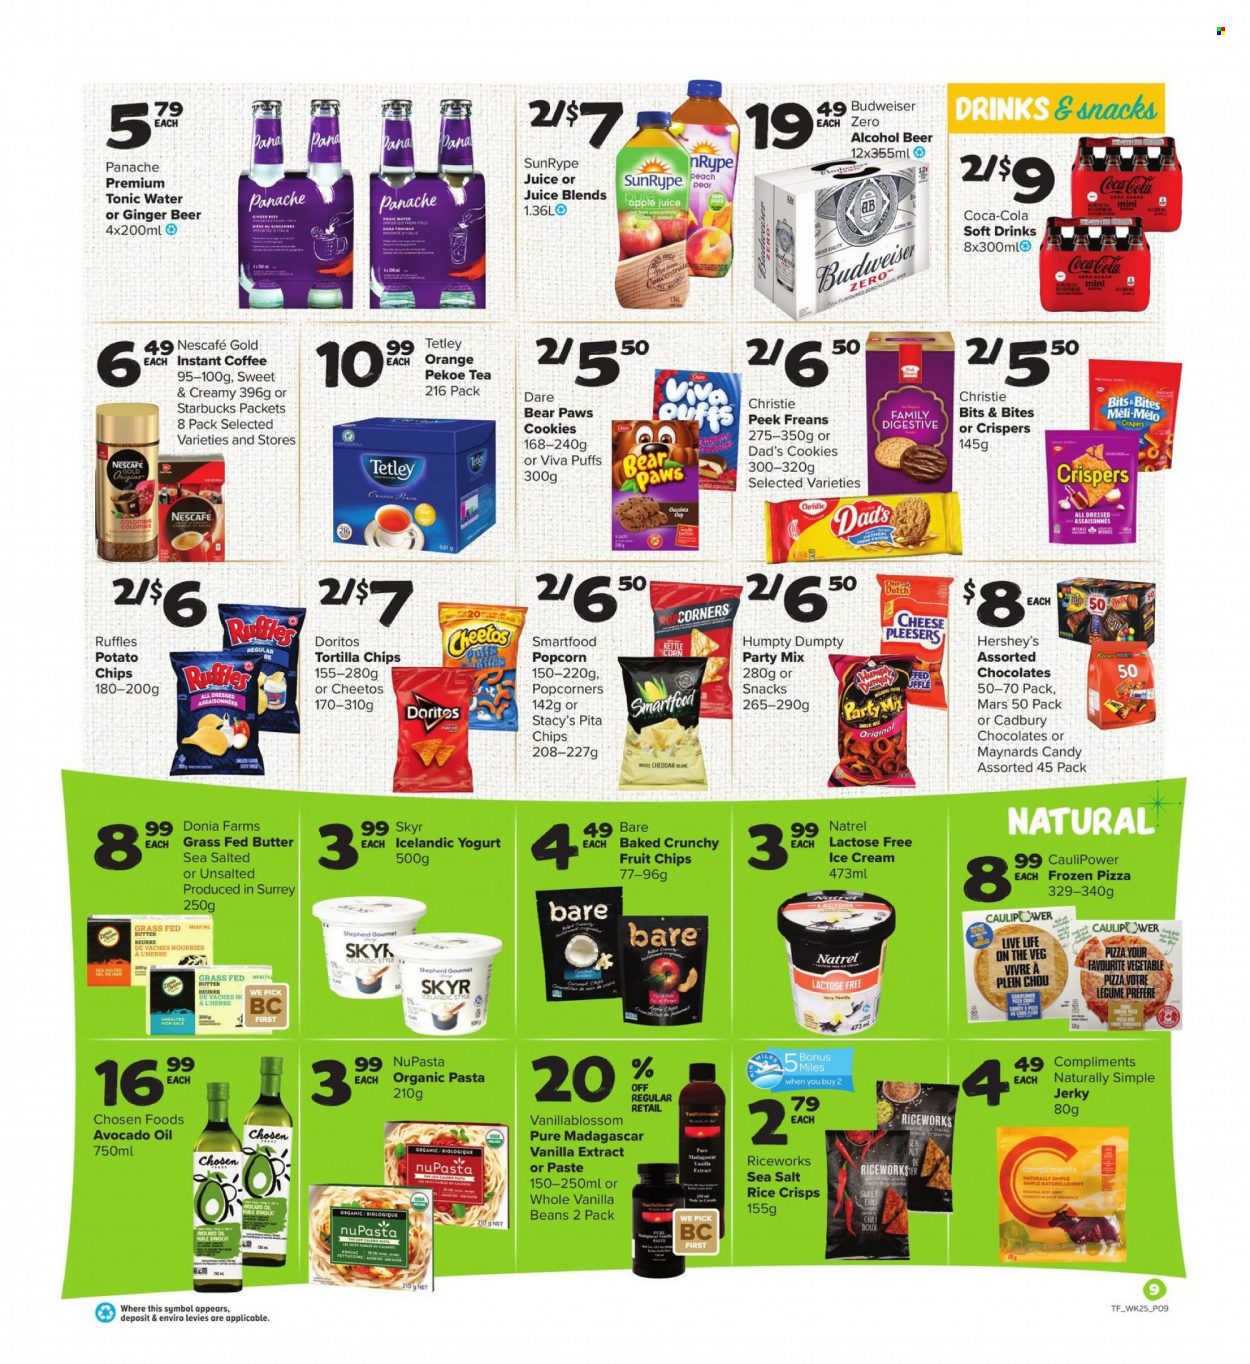 thumbnail - Thrifty Foods Flyer - October 14, 2021 - October 20, 2021 - Sales products - puffs, corn, pears, pizza, pasta, jerky, yoghurt, butter, ice cream, Hershey's, cookies, Mars, Cadbury, Digestive, Doritos, tortilla chips, Cheetos, Smartfood, popcorn, Ruffles, rice crisps, pita chips, vanilla extract, rice, avocado oil, oil, apple juice, Coca-Cola, juice, tonic, soft drink, soda, tea, instant coffee, Starbucks, alcohol, beer, Budweiser, Nescafé, oranges, ginger beer. Page 9.